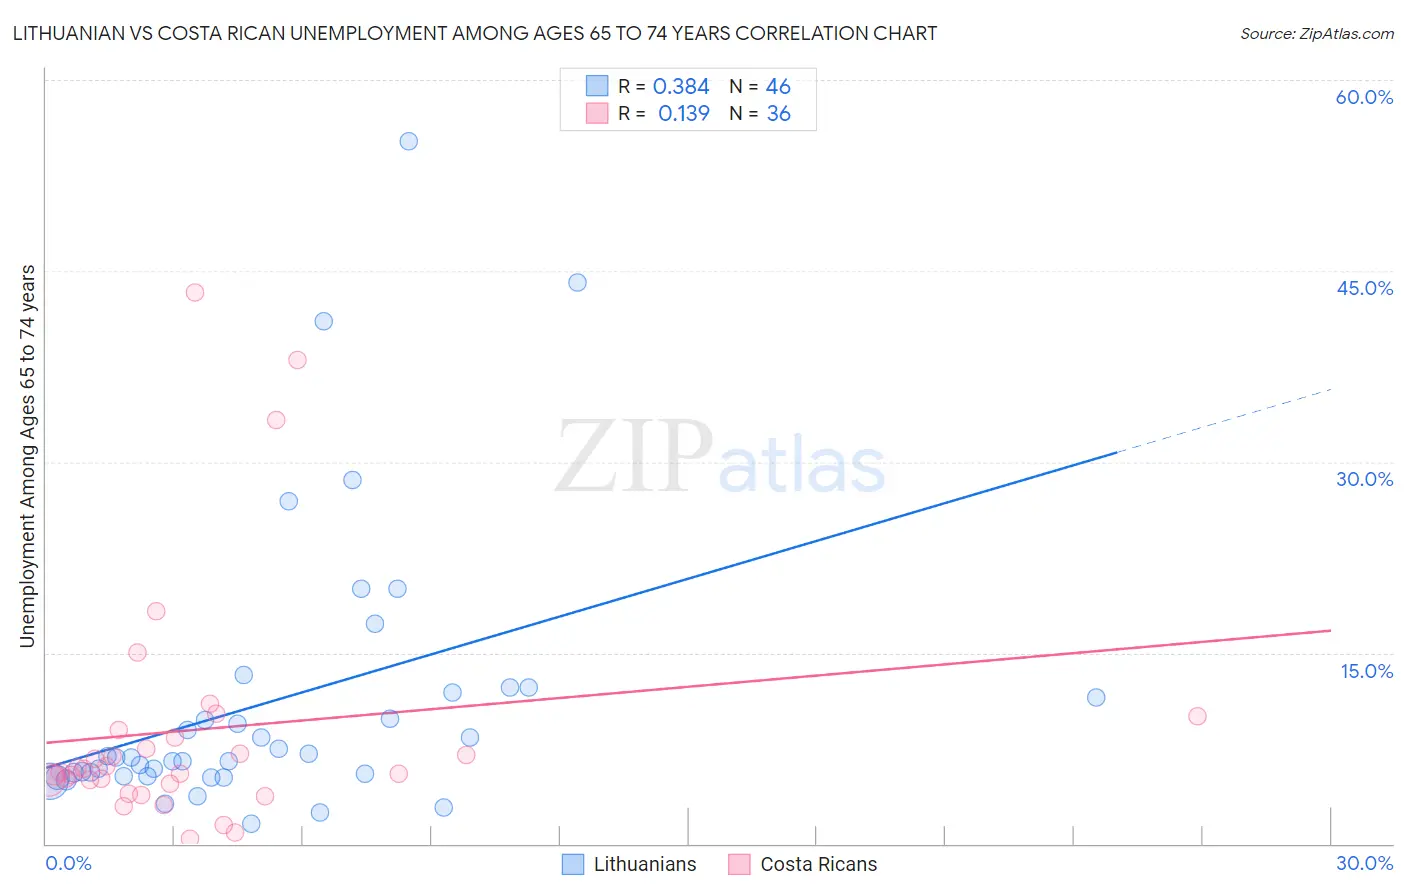 Lithuanian vs Costa Rican Unemployment Among Ages 65 to 74 years